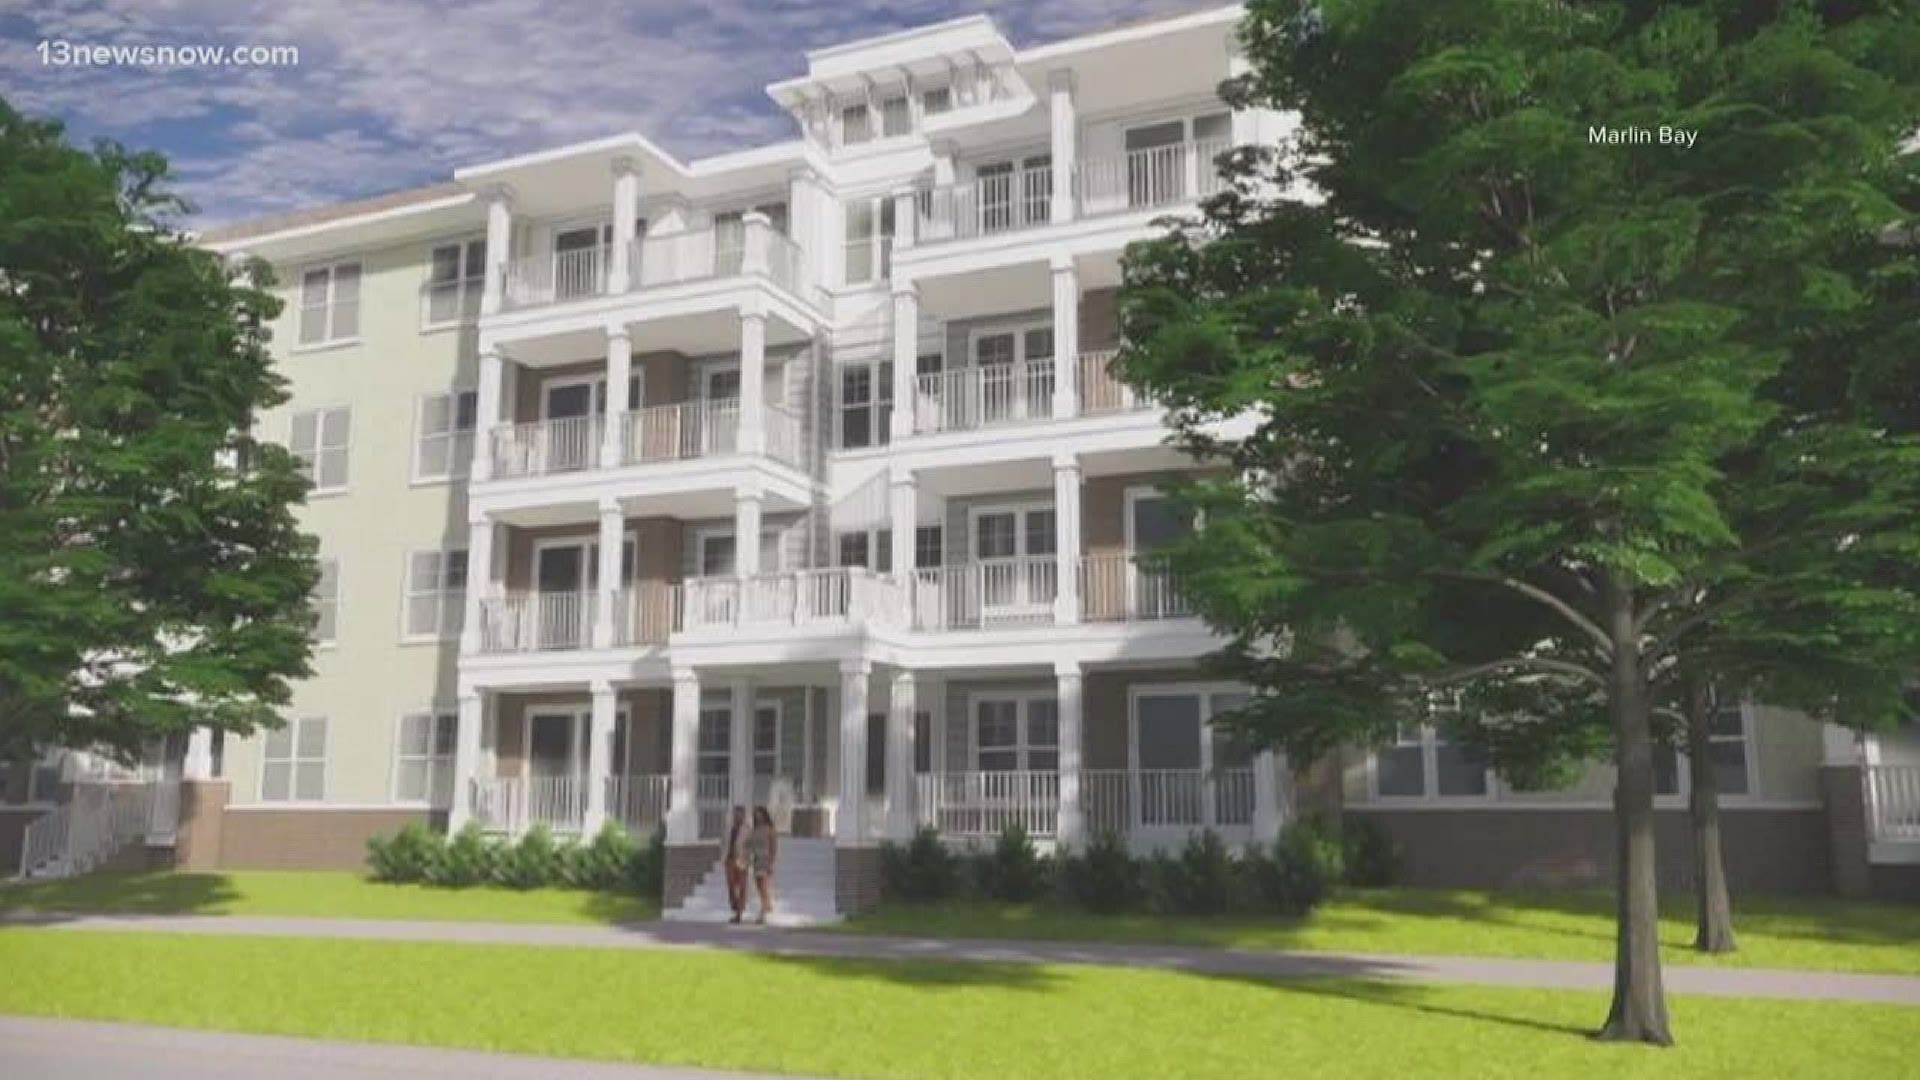 A developer wants to build an apartment building with a pool and parking garage on Shore Drive near Marlin Bay Drive. Community members push back on the plans.